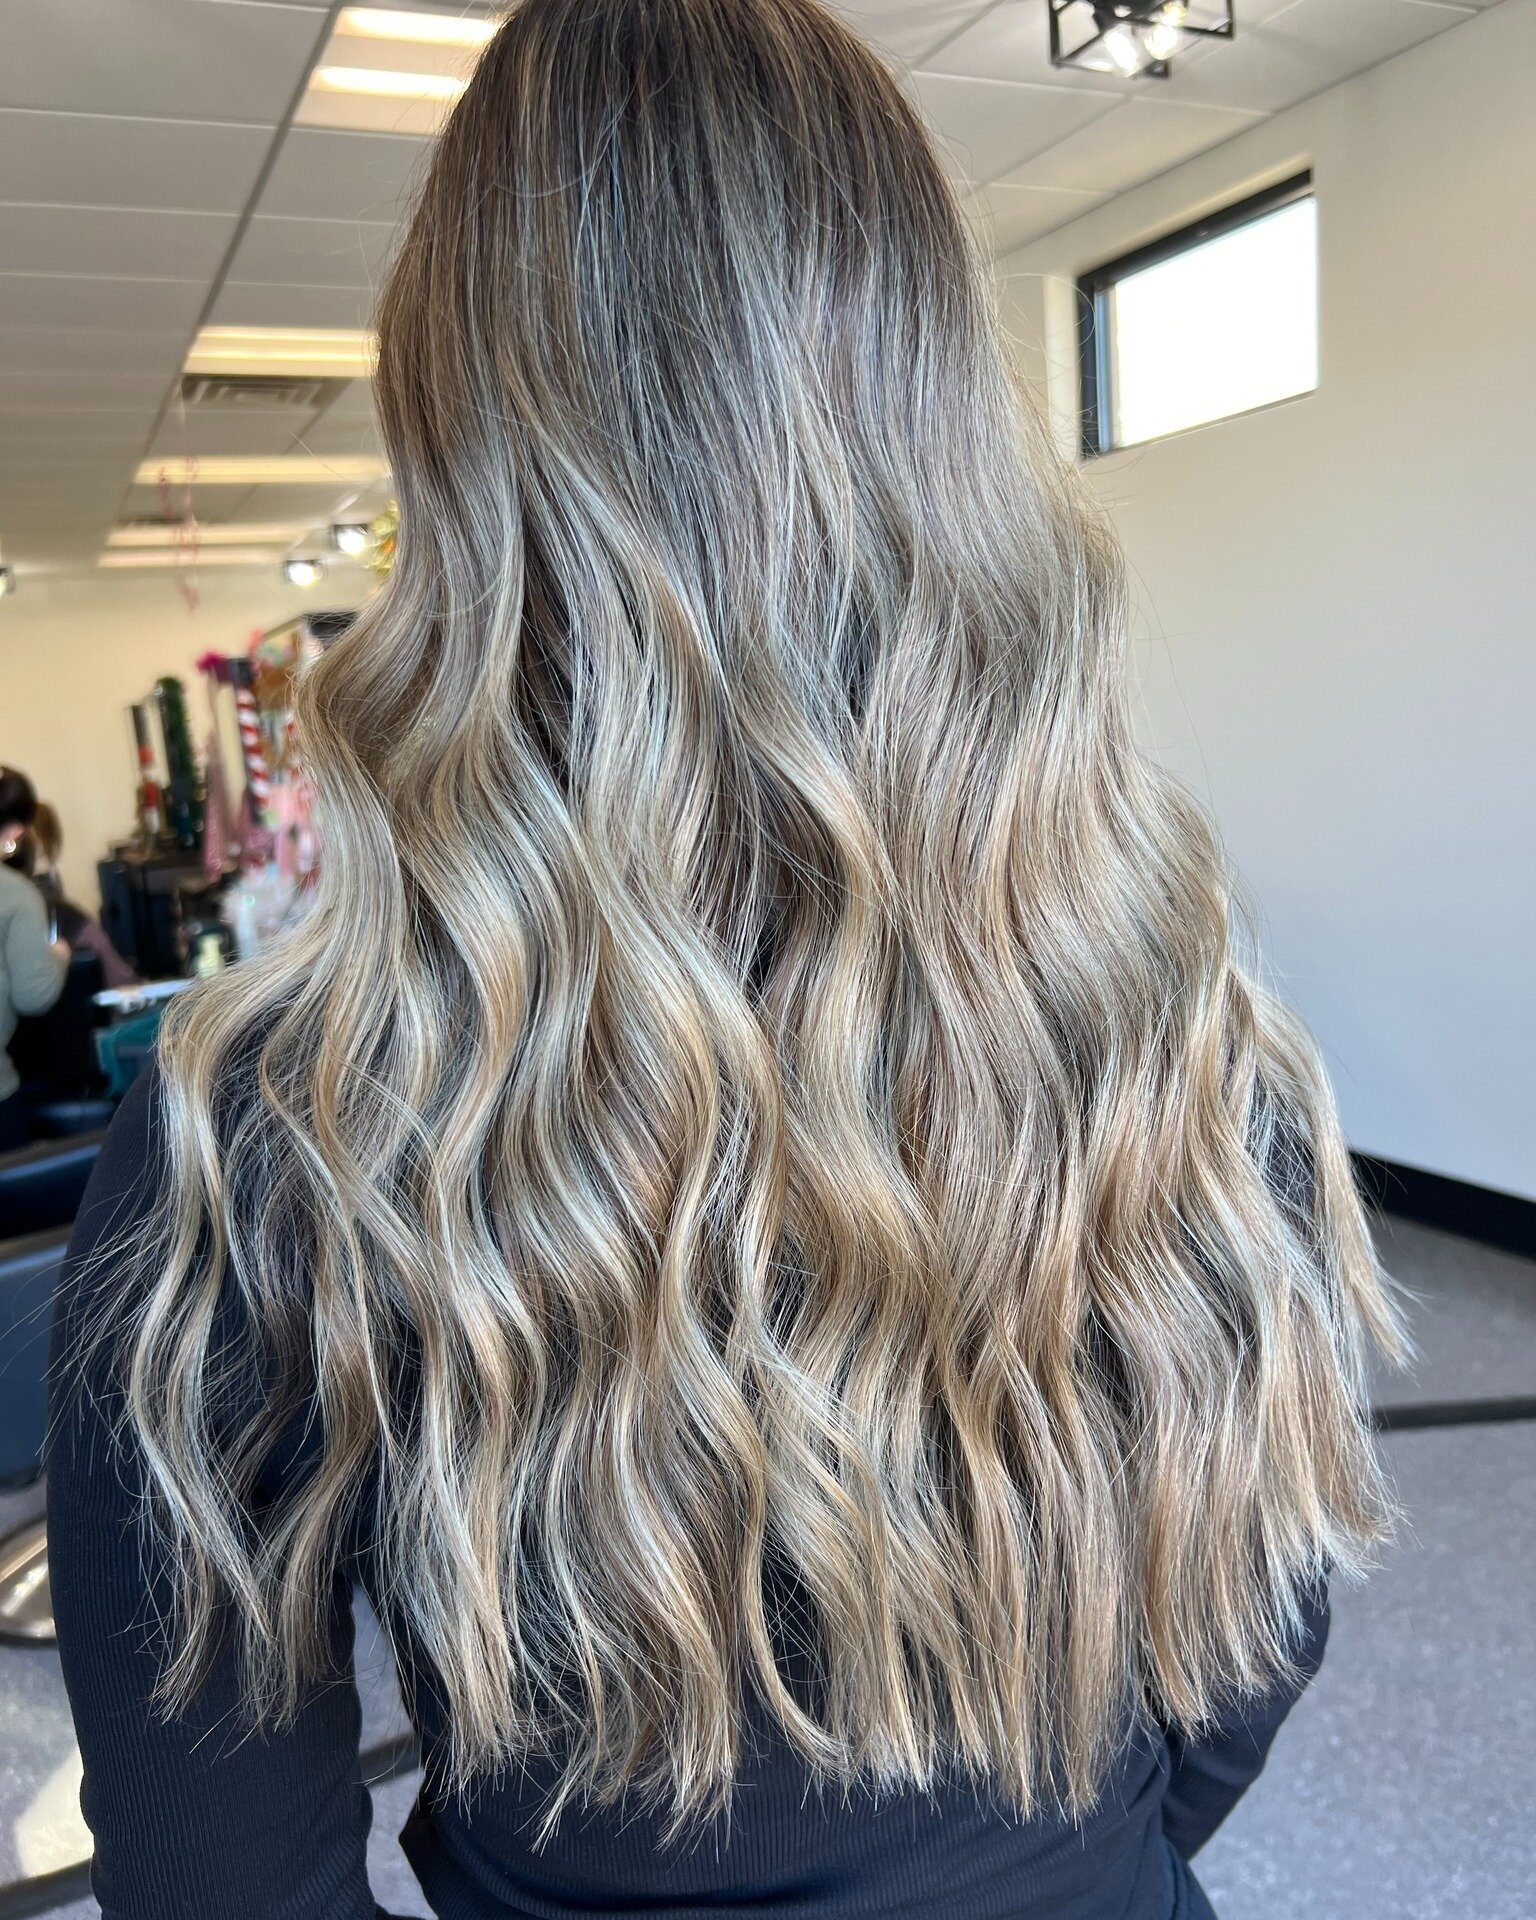 This cutie is sick of winter and decided touch up her blonde to bring sunshine back in to her day to day look!

@jordans.hair.journey slayed this balayage!

#ohbabysalon #balayage #healthyhair #bloomingtonil #salonlife #sunkissed